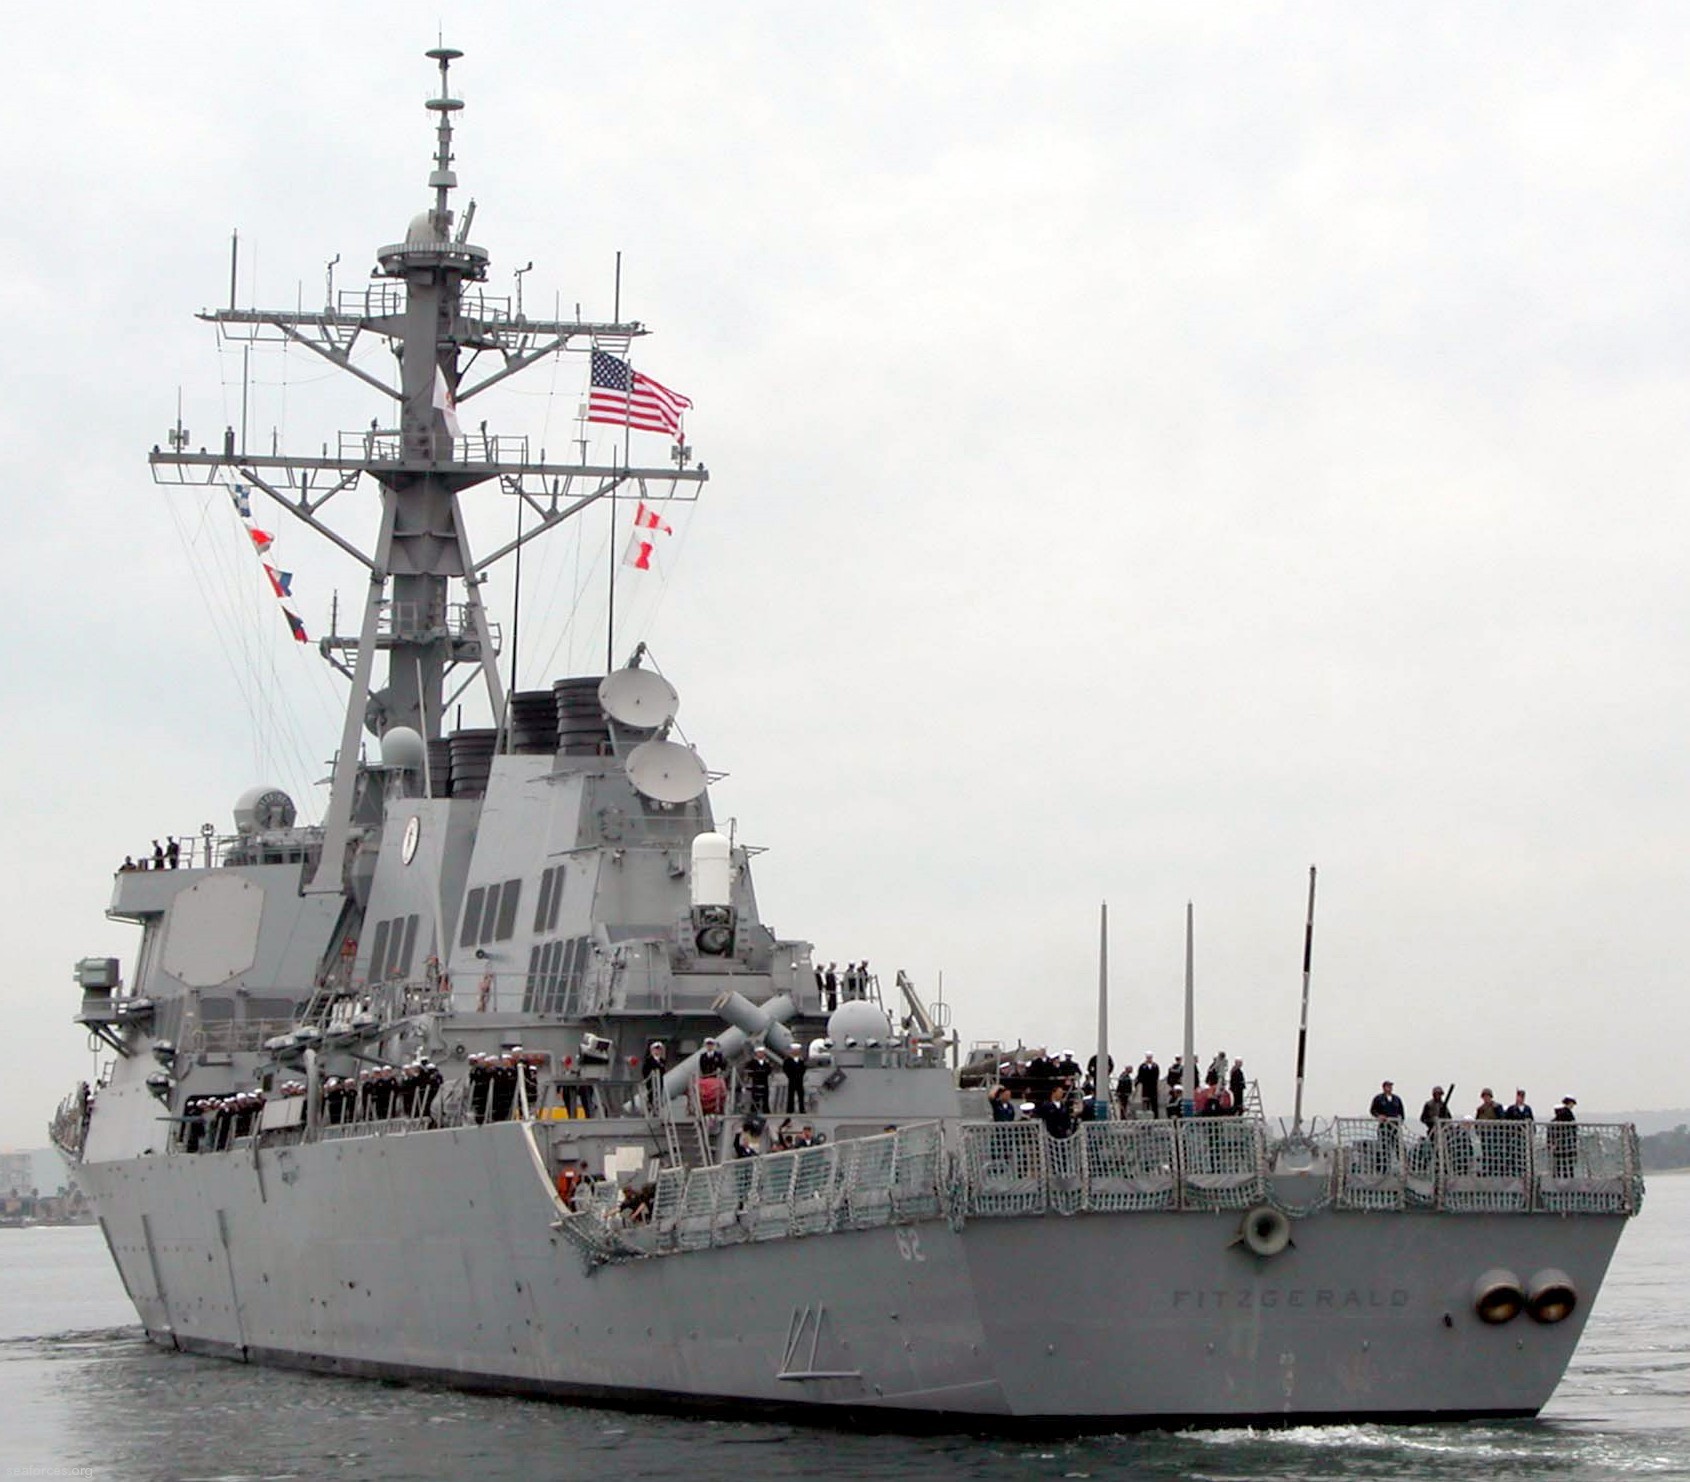 ddg-62 uss fitzgerald guided missile destroyer 2003 99 naval station san diego california